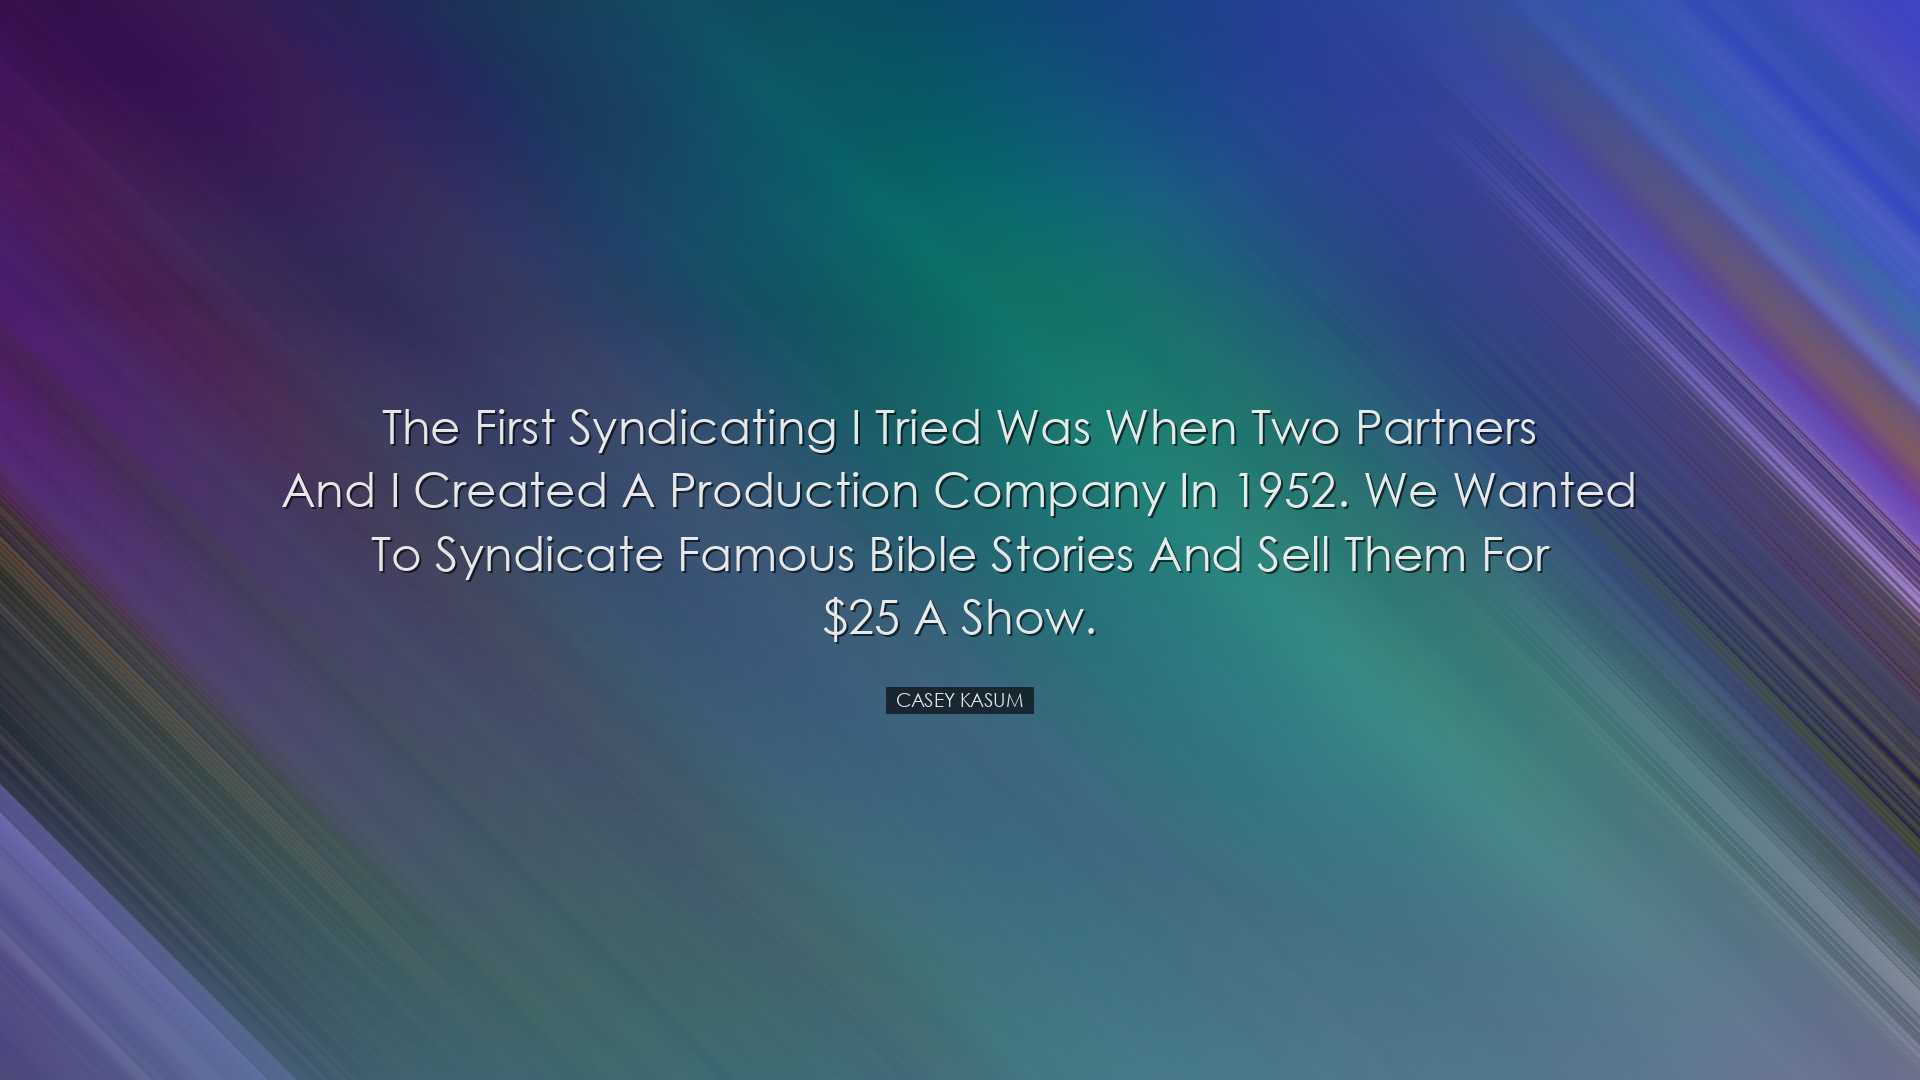 The first syndicating I tried was when two partners and I created